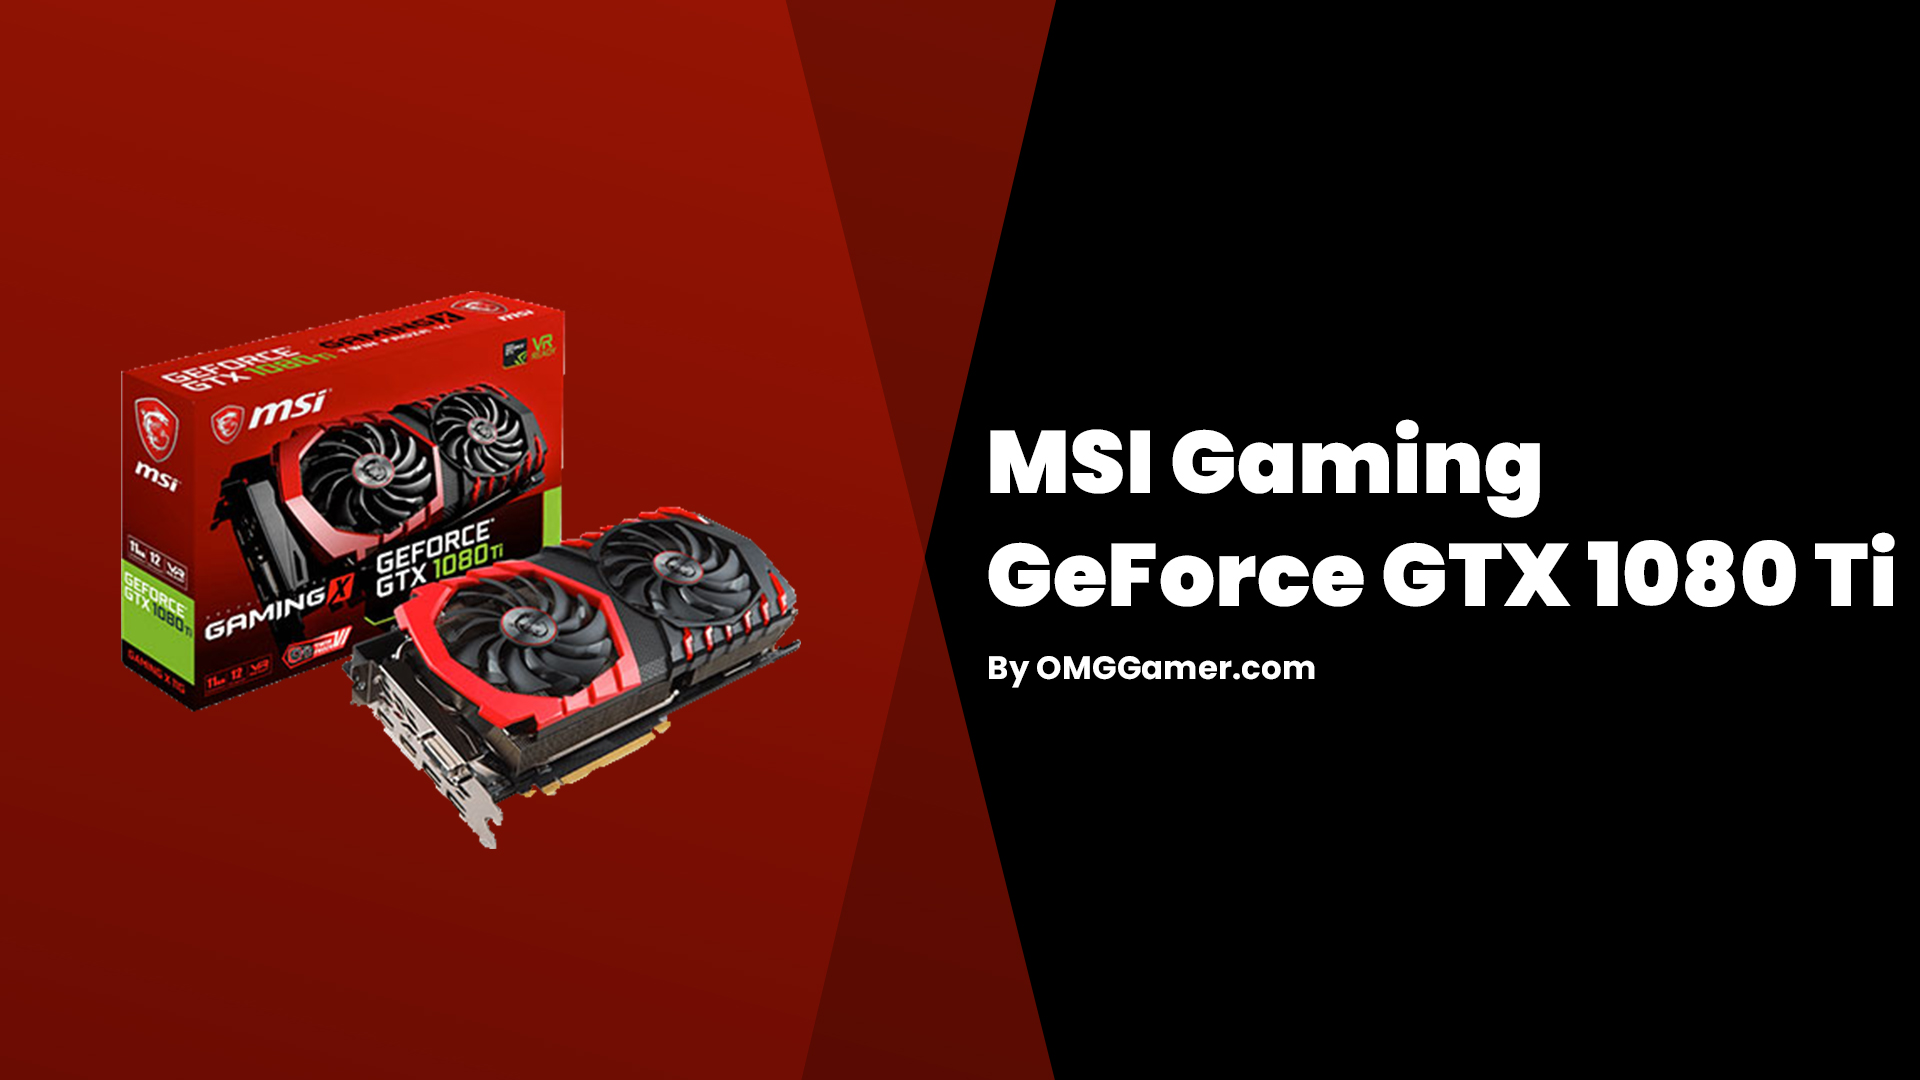 MSI Gaming GeForce GTX 1080 Ti: Cheapest 4K Graphics Cards